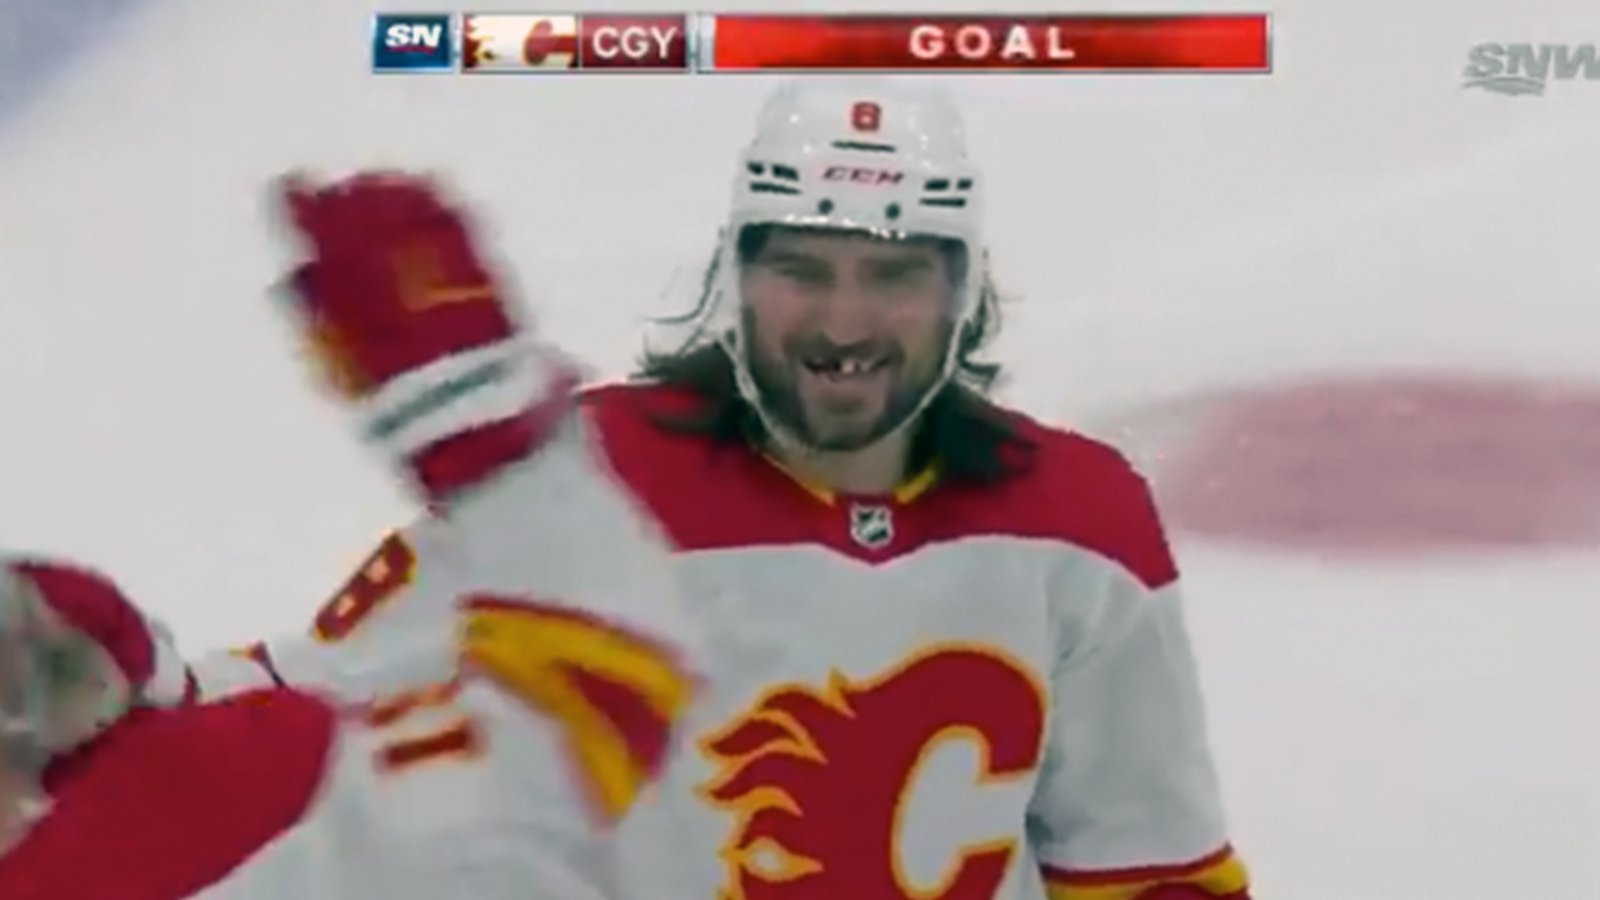 Chris Tanev scores his first goal with the Flames... from his own blueline